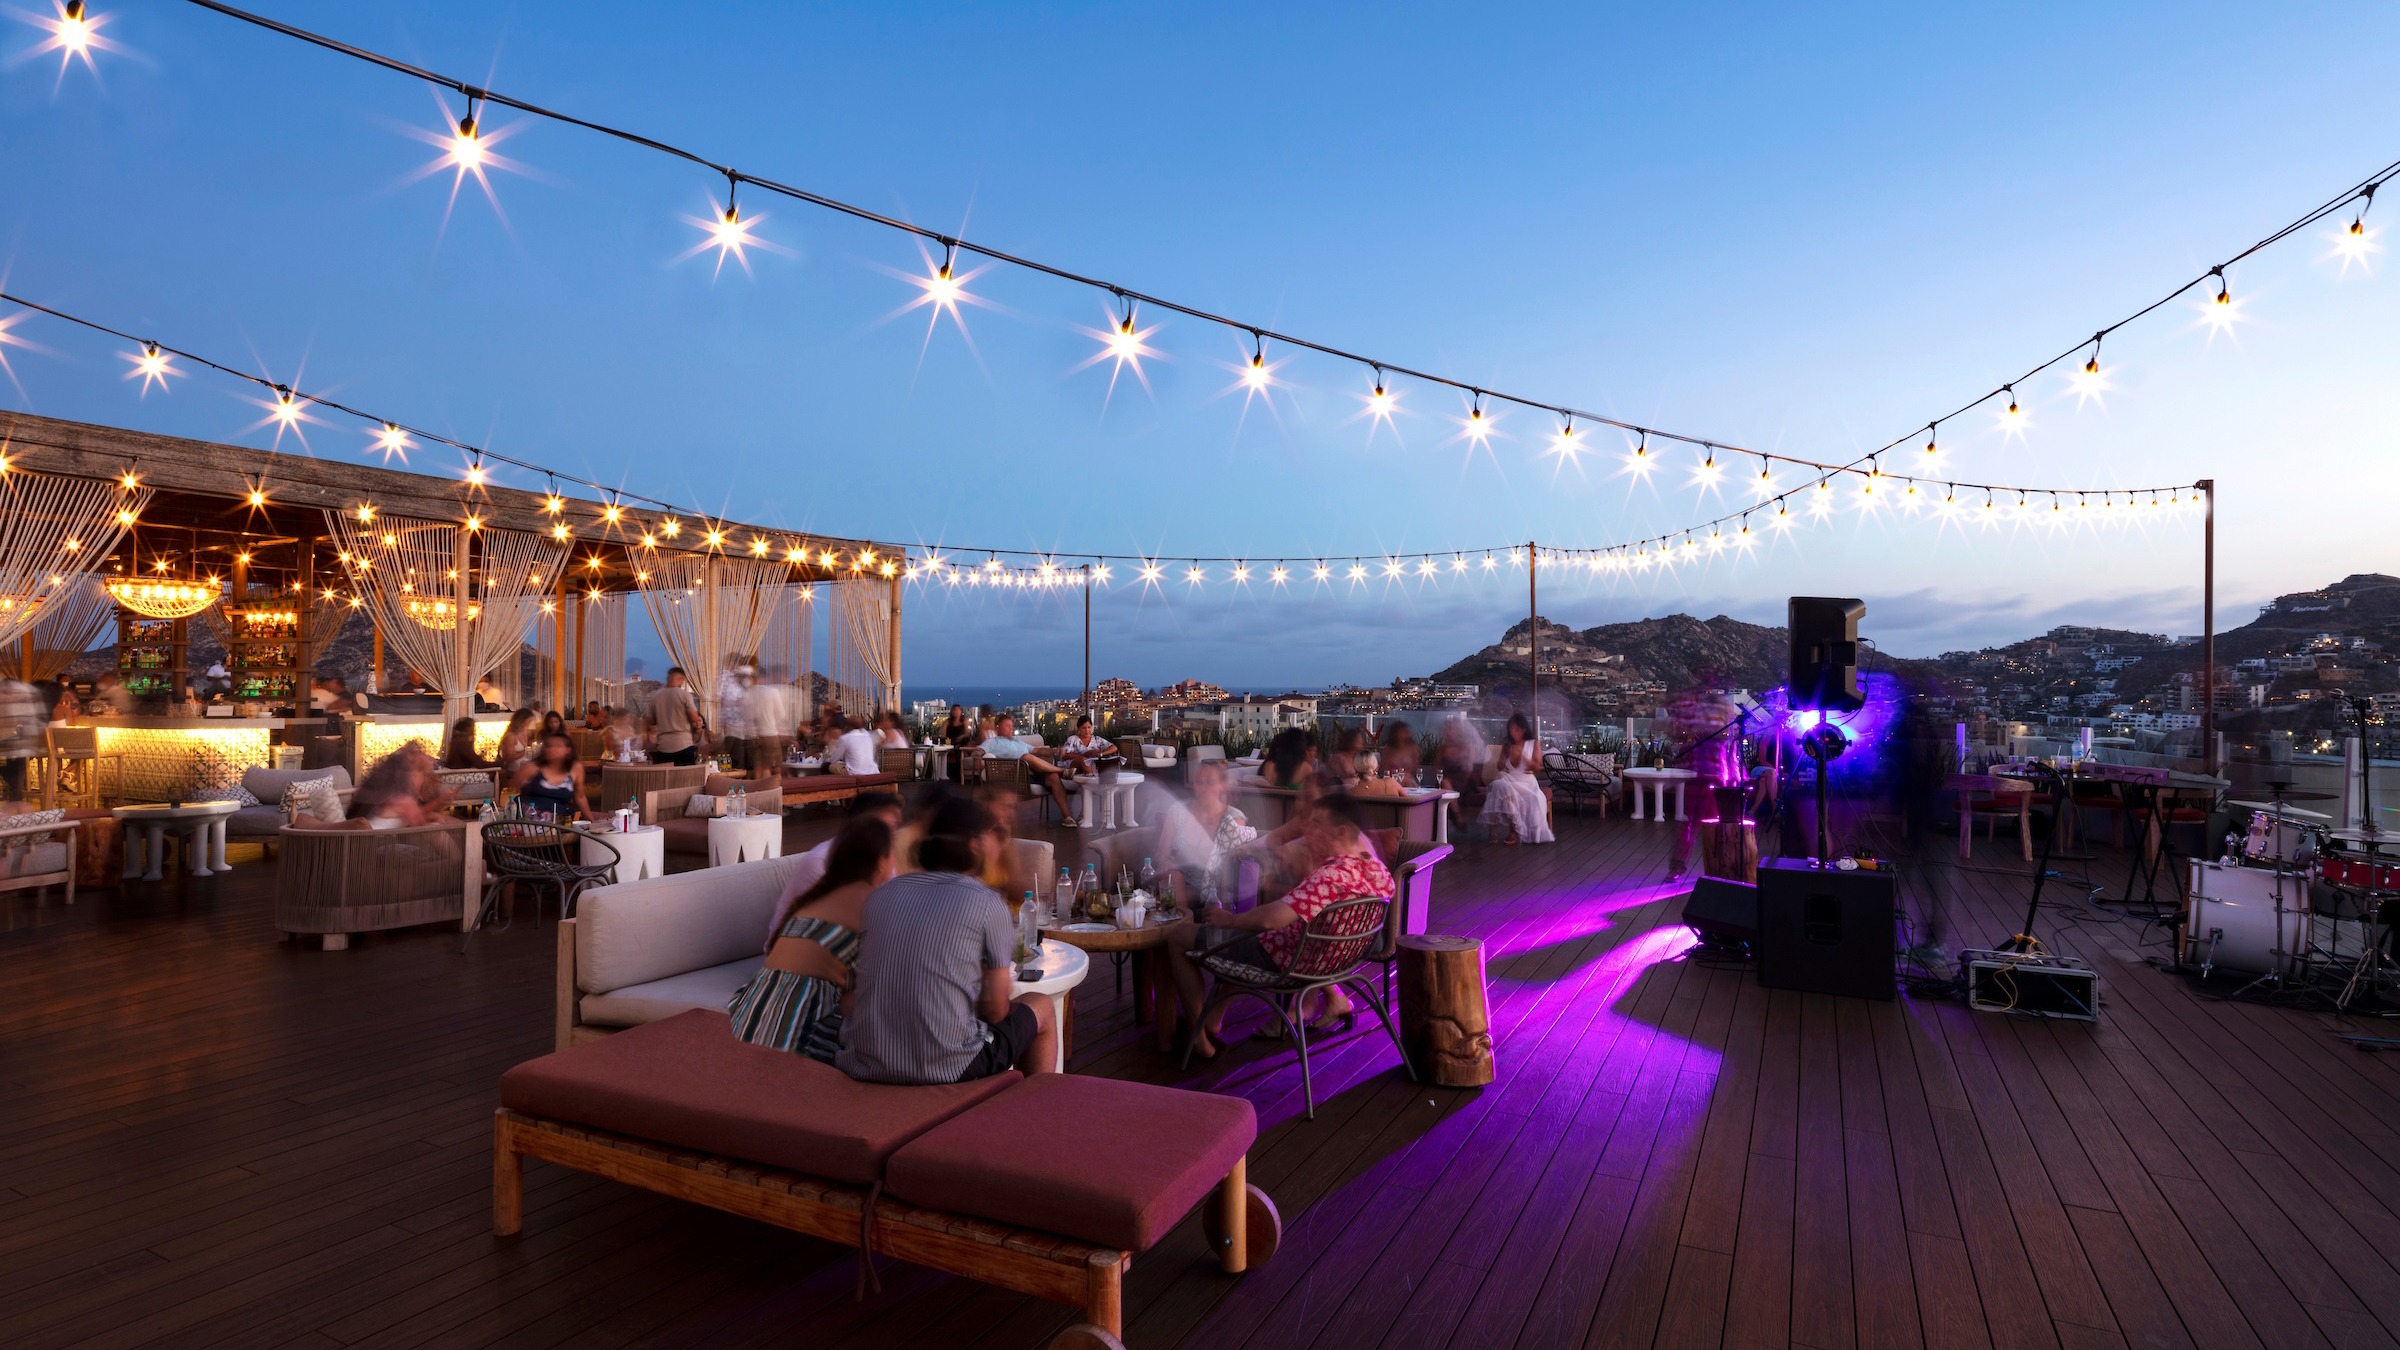 An evening event outdoors at Corazon Cabo Resort and Spa